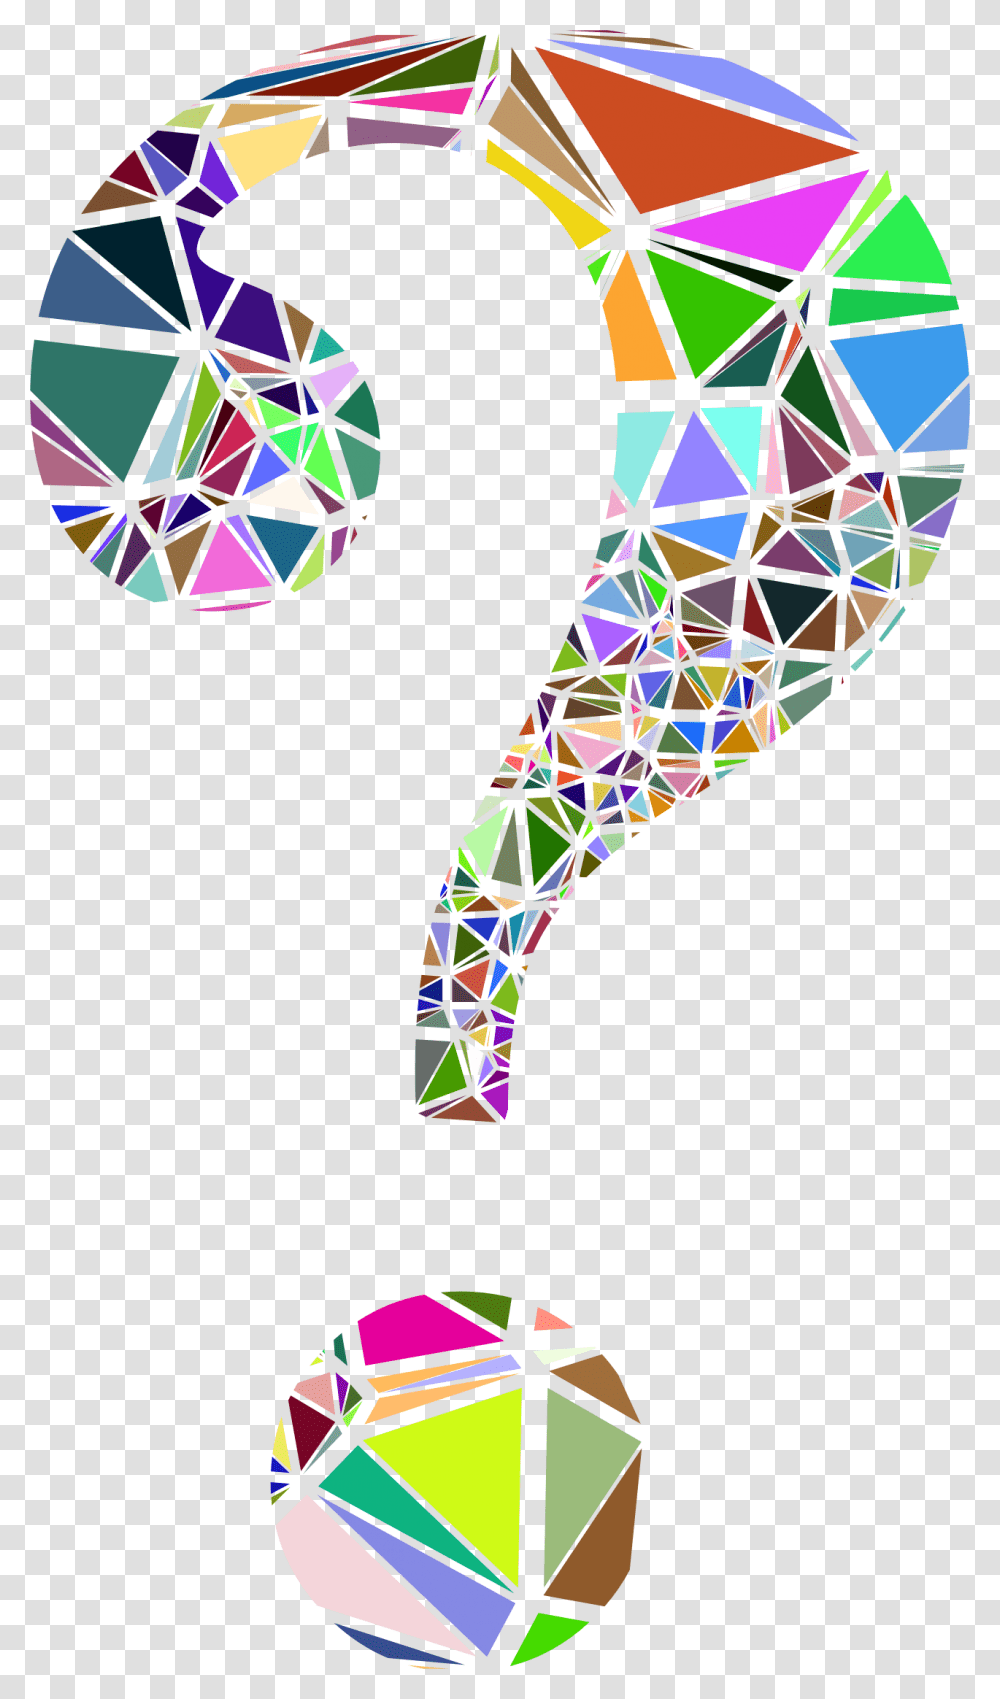 Low Poly Shattered Question Mark Clip Arts Designs Question Mark, Stained Glass, Modern Art, Construction Crane Transparent Png